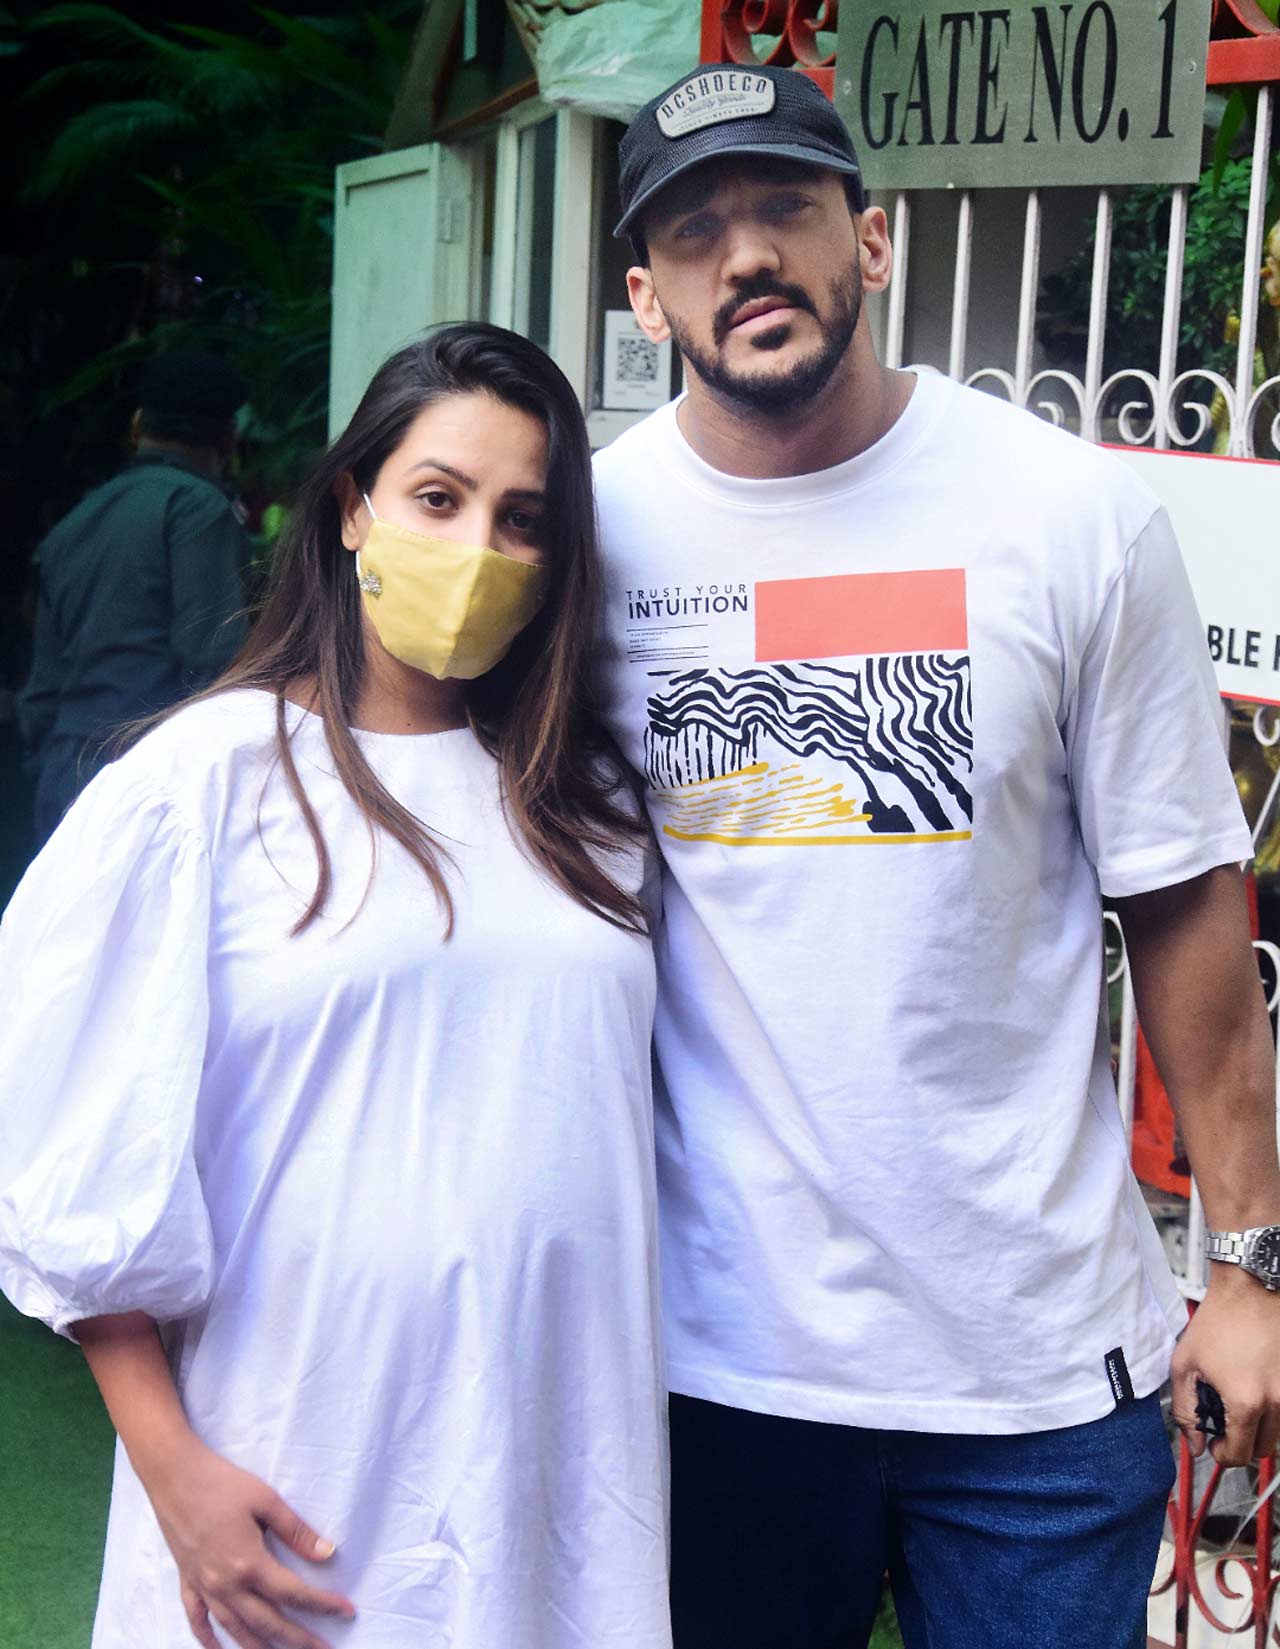 Anita Hassanandani was snapped with Rohit Reddy at a clinic in the city. The actress sported a pretty white outfit during the outing. Speaking of her hubby Rohit, the entrepreneur looked dapper in his casuals. All pictures/Yogen Shah